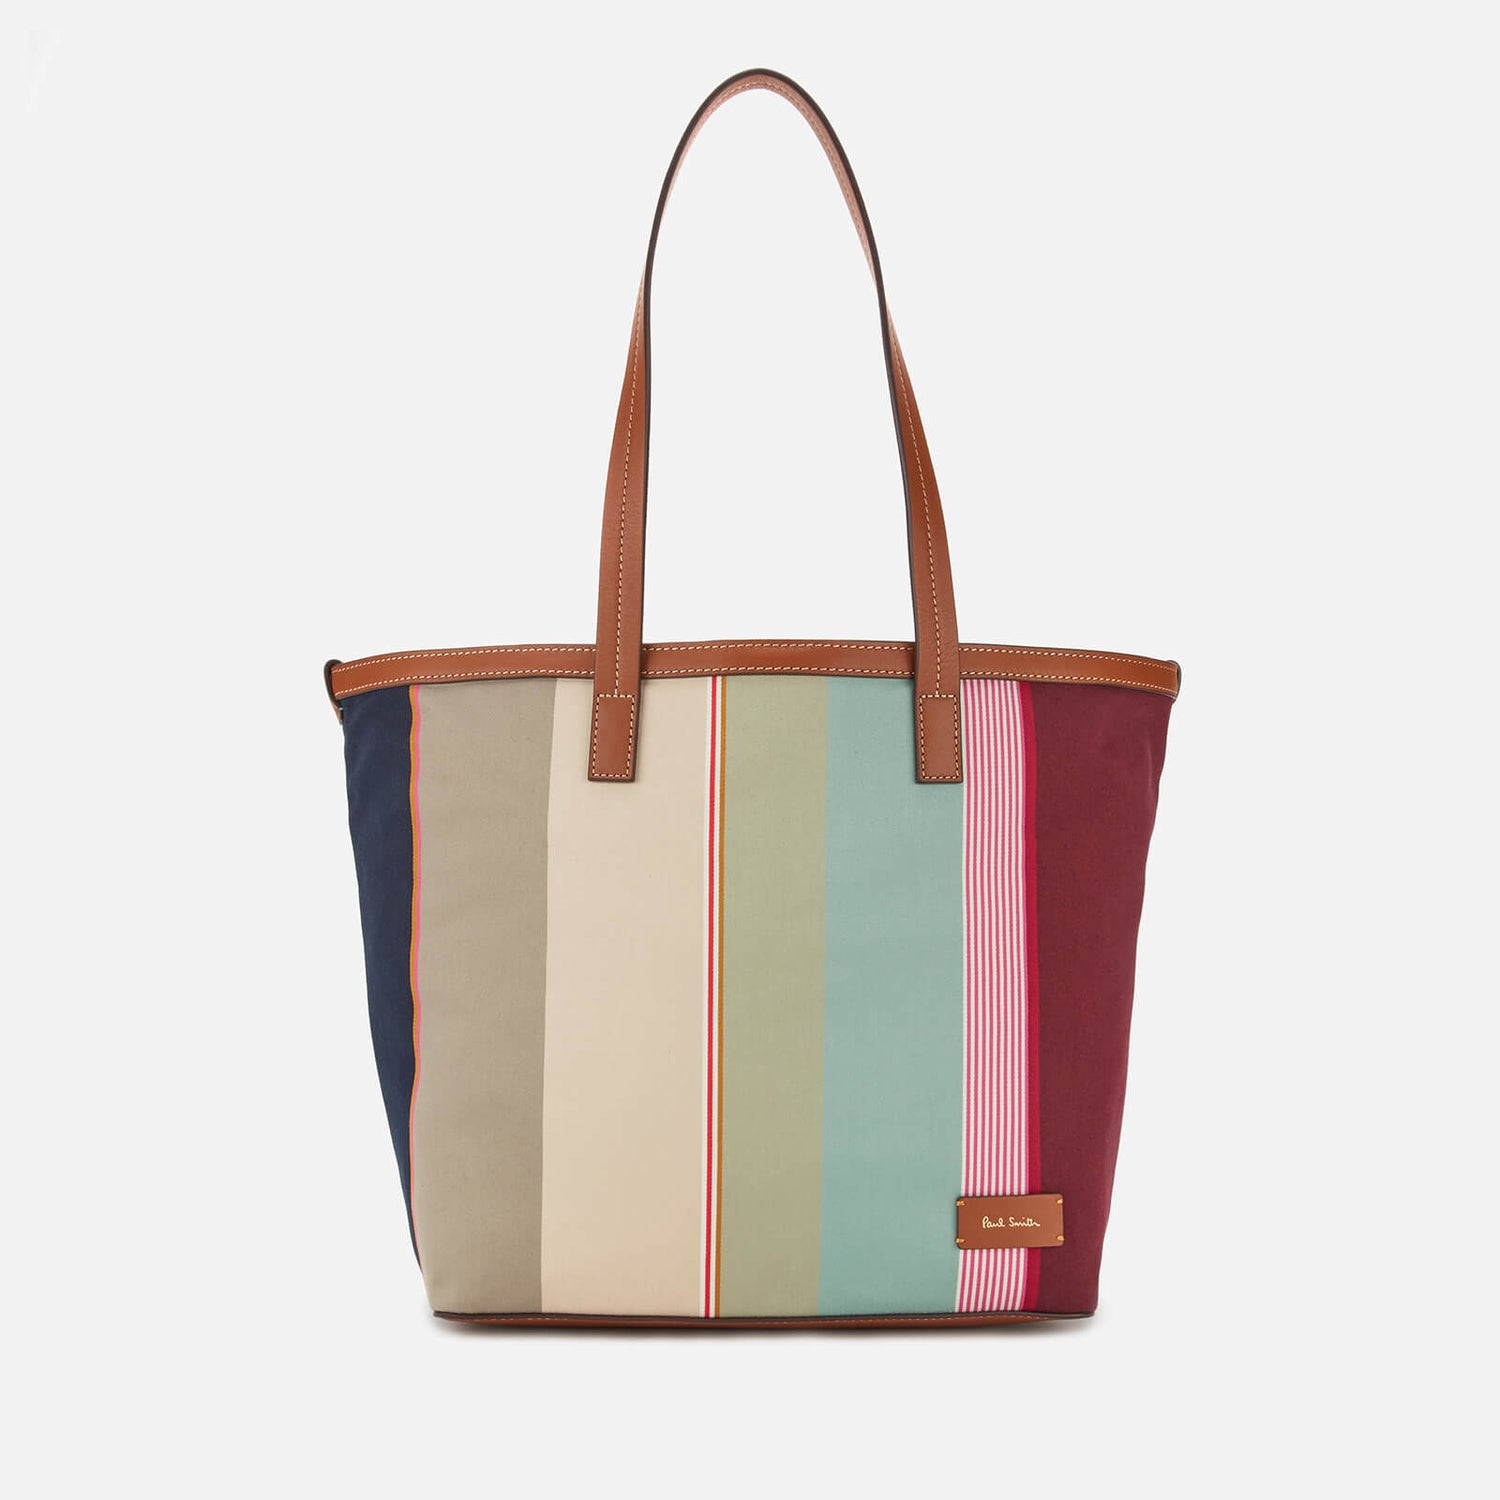 Paul Smith Women's Stripe Tote Bag - Multi - Free UK Delivery Available